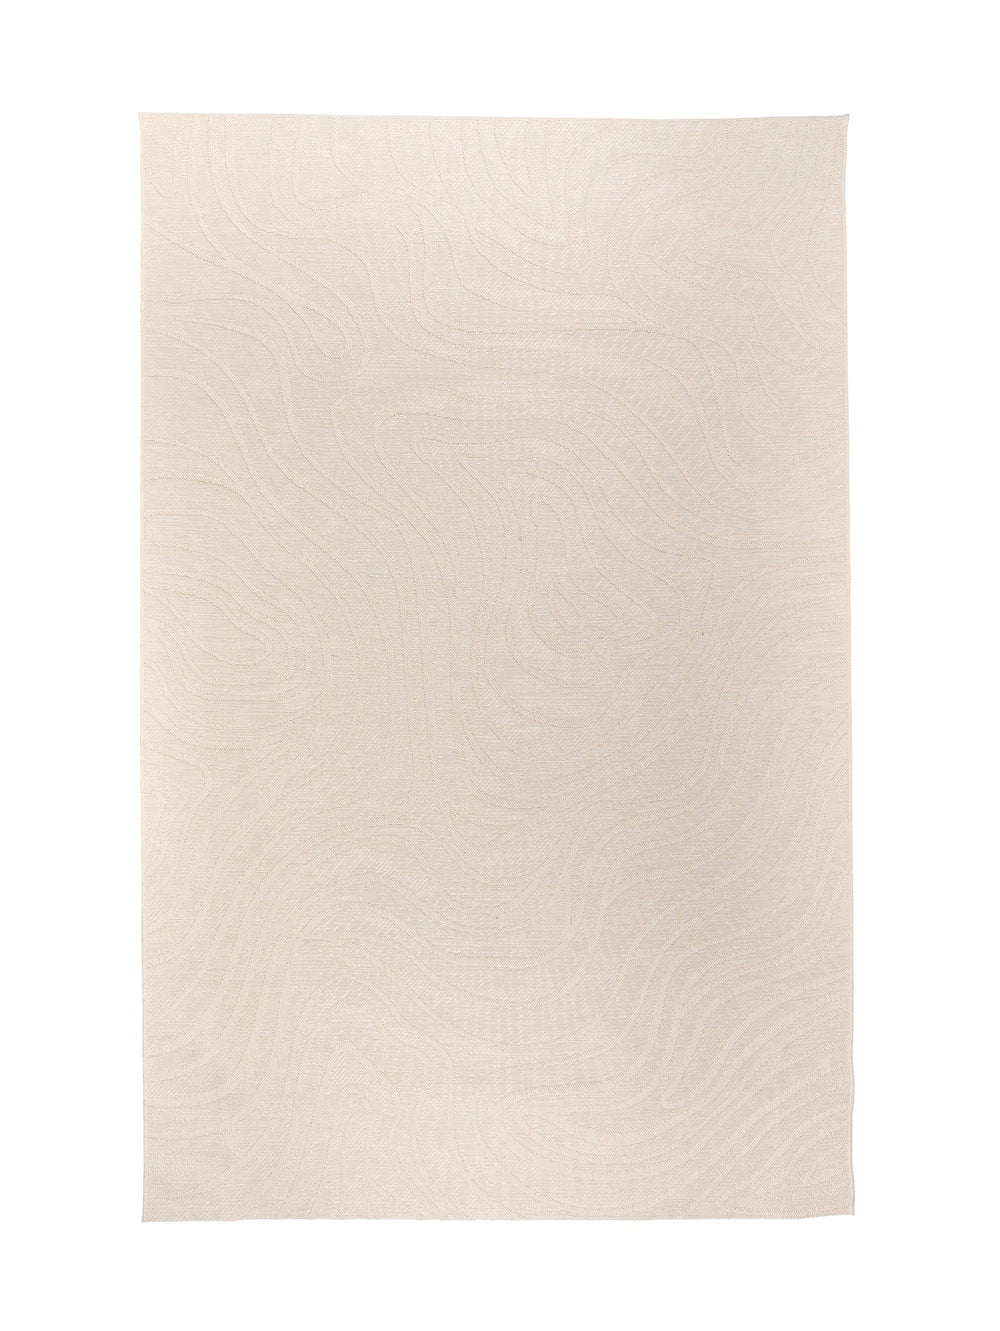 Syncline Outdoor Rug in Whipped Cream - outdoor rug- Hertex Haus Online - badge_fully_outdoor